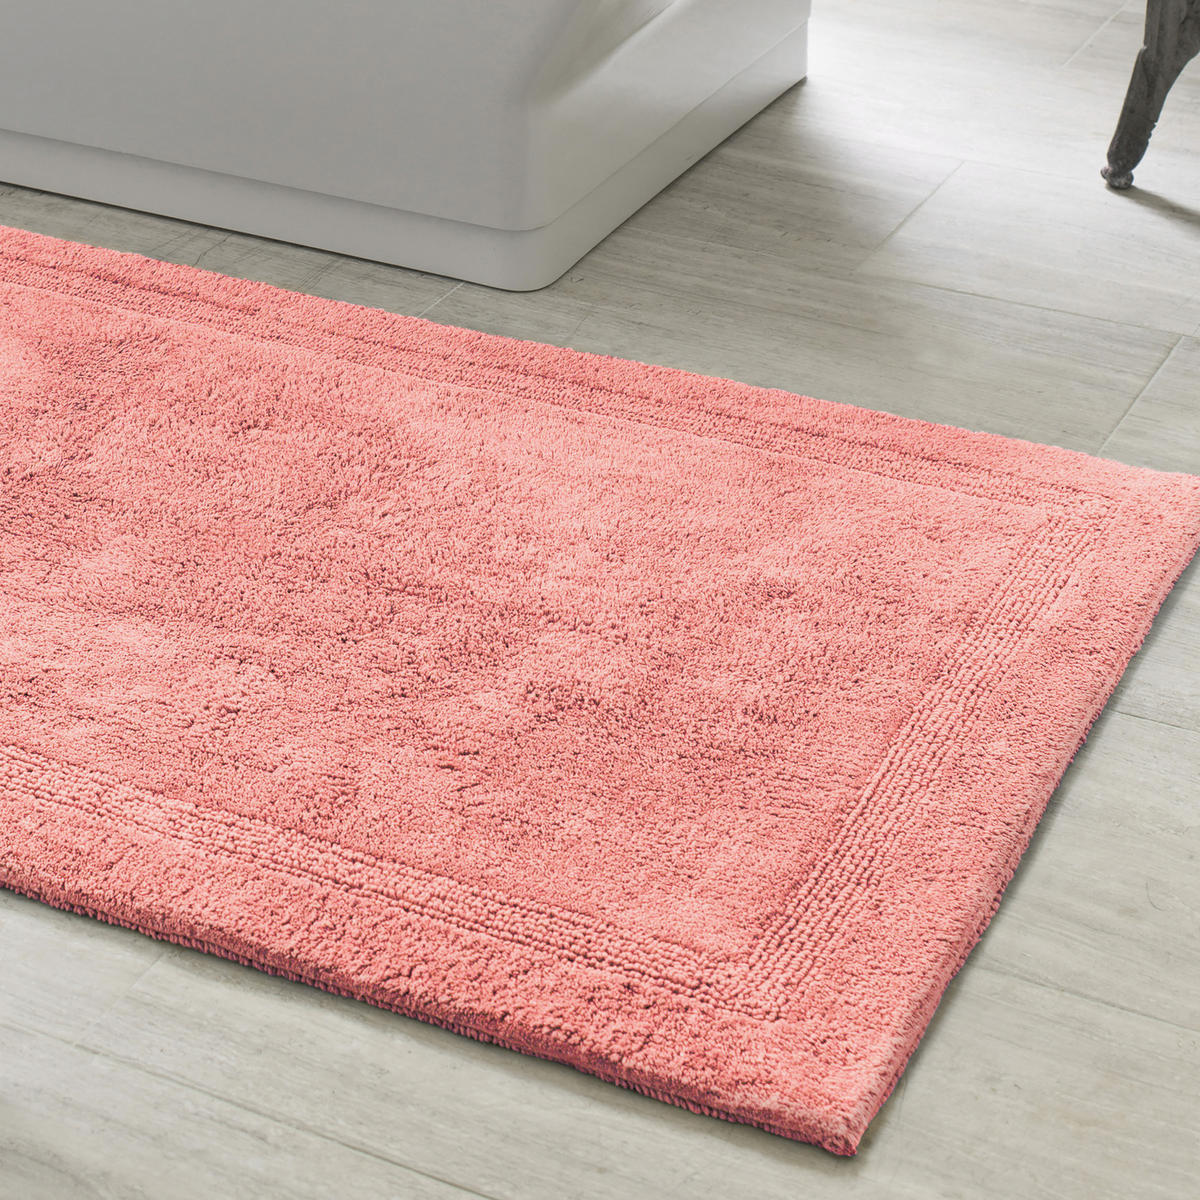 coral and white bath rugs